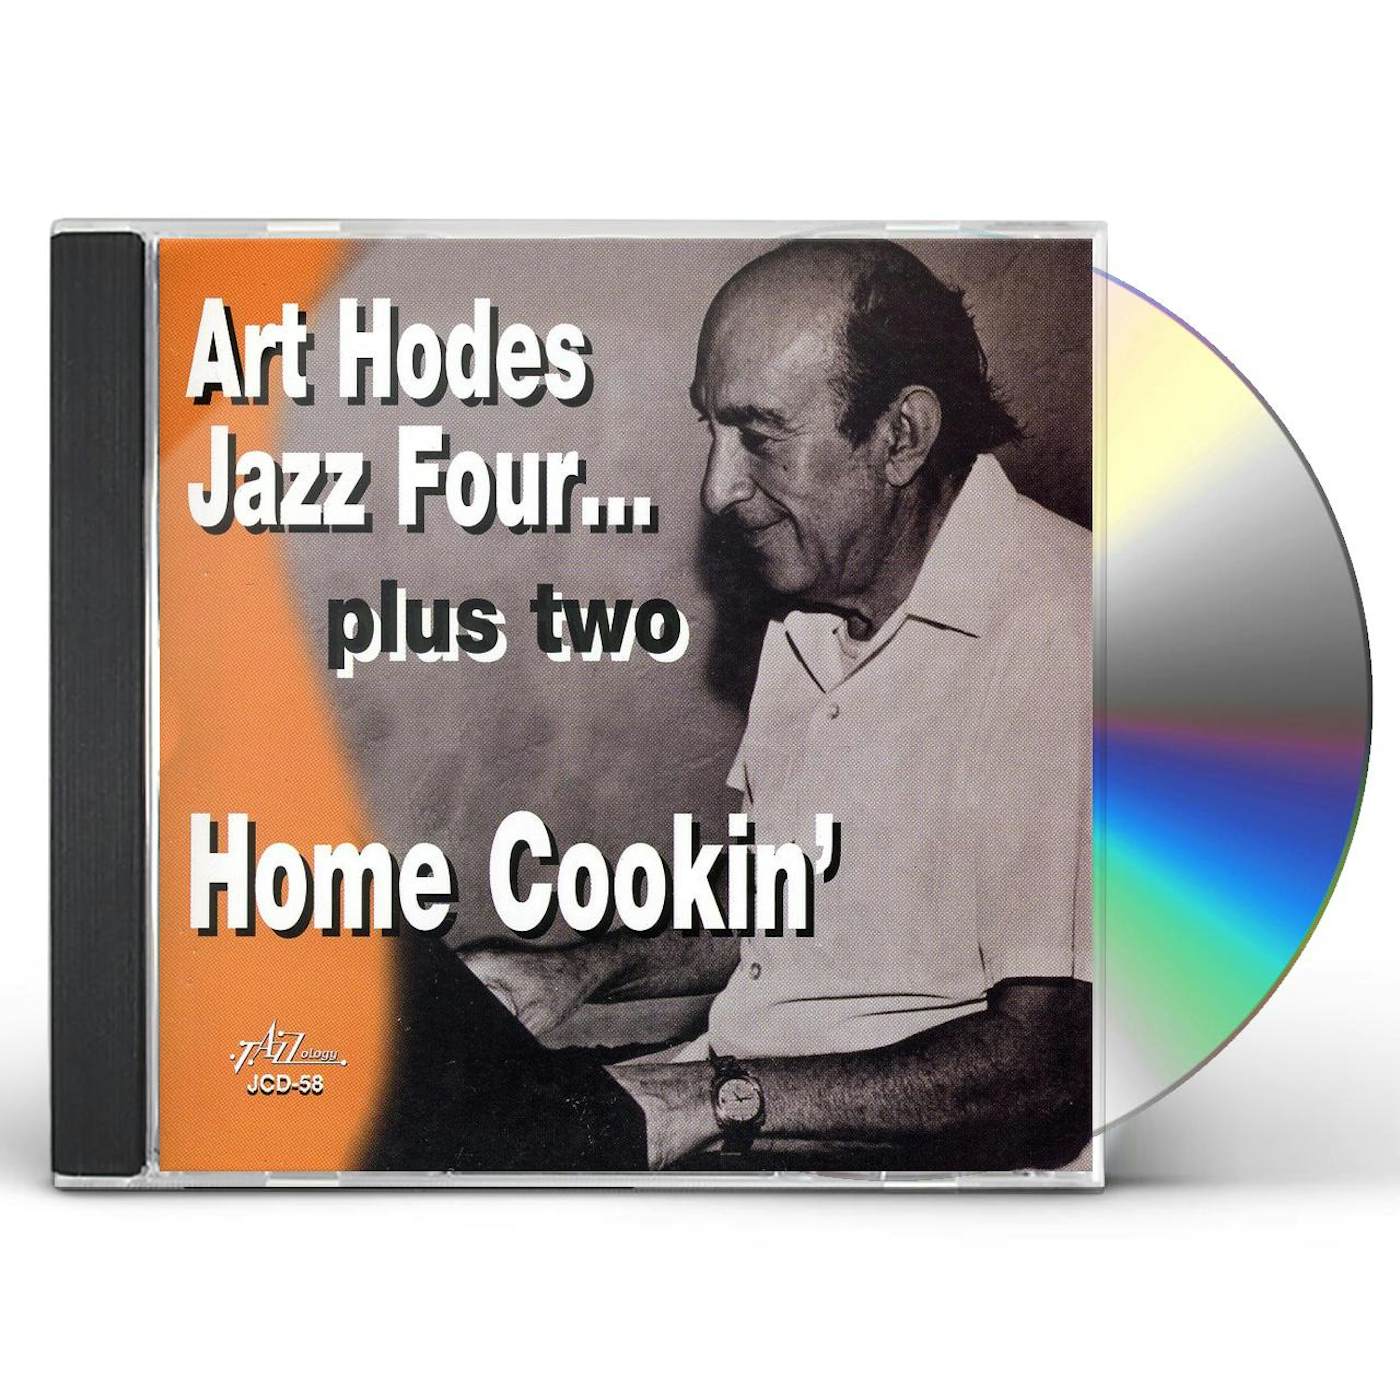 HOME COOKIN: ART HODES JAZZ FOUR PLUS TWO CD